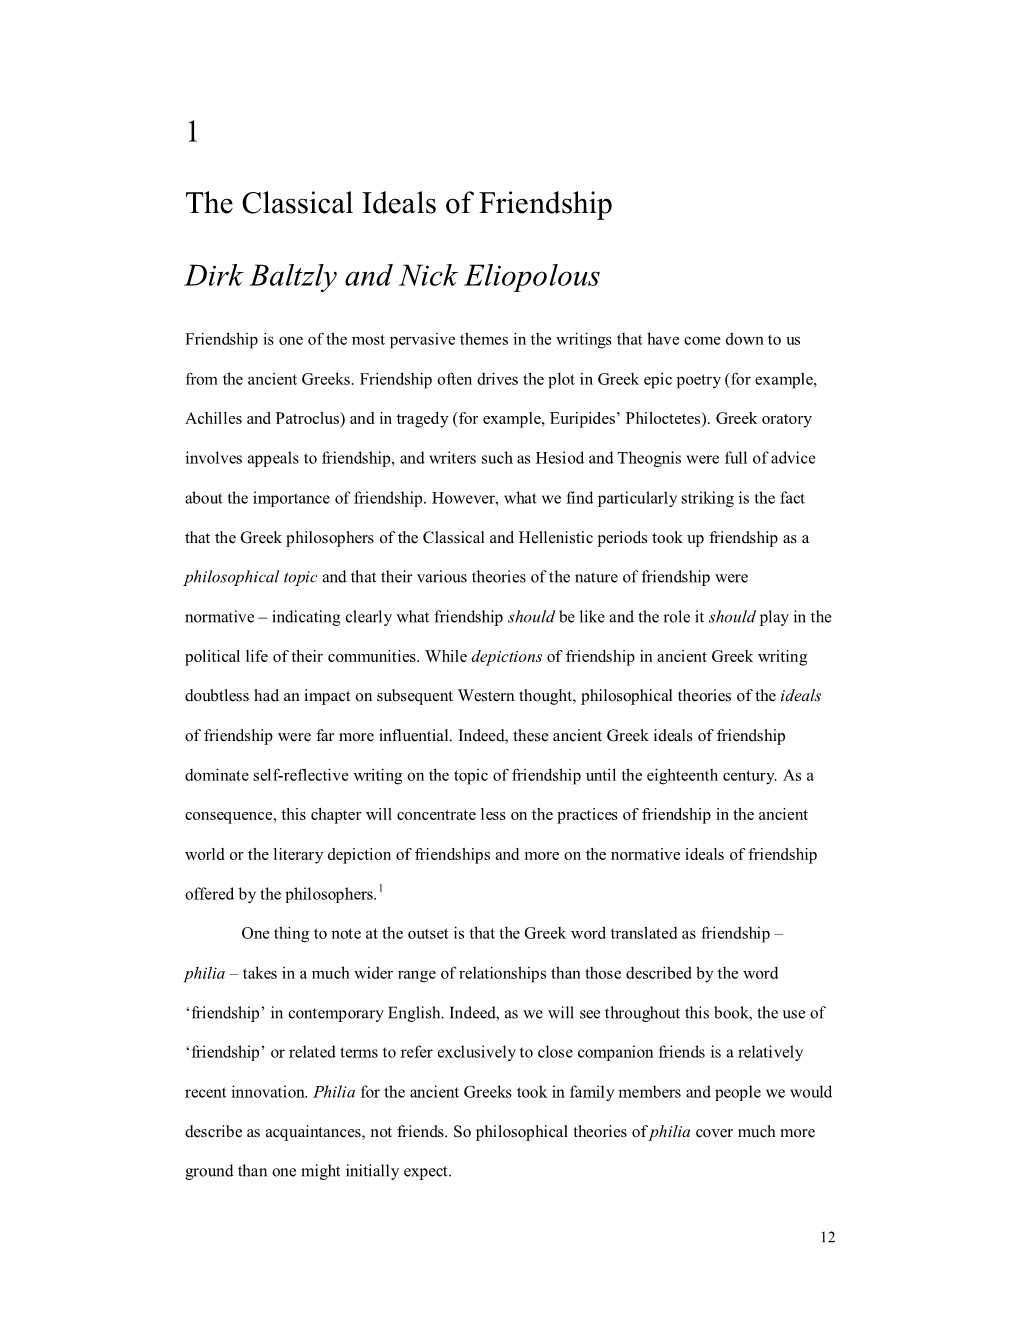 1 the Classical Ideals of Friendship Dirk Baltzly and Nick Eliopolous